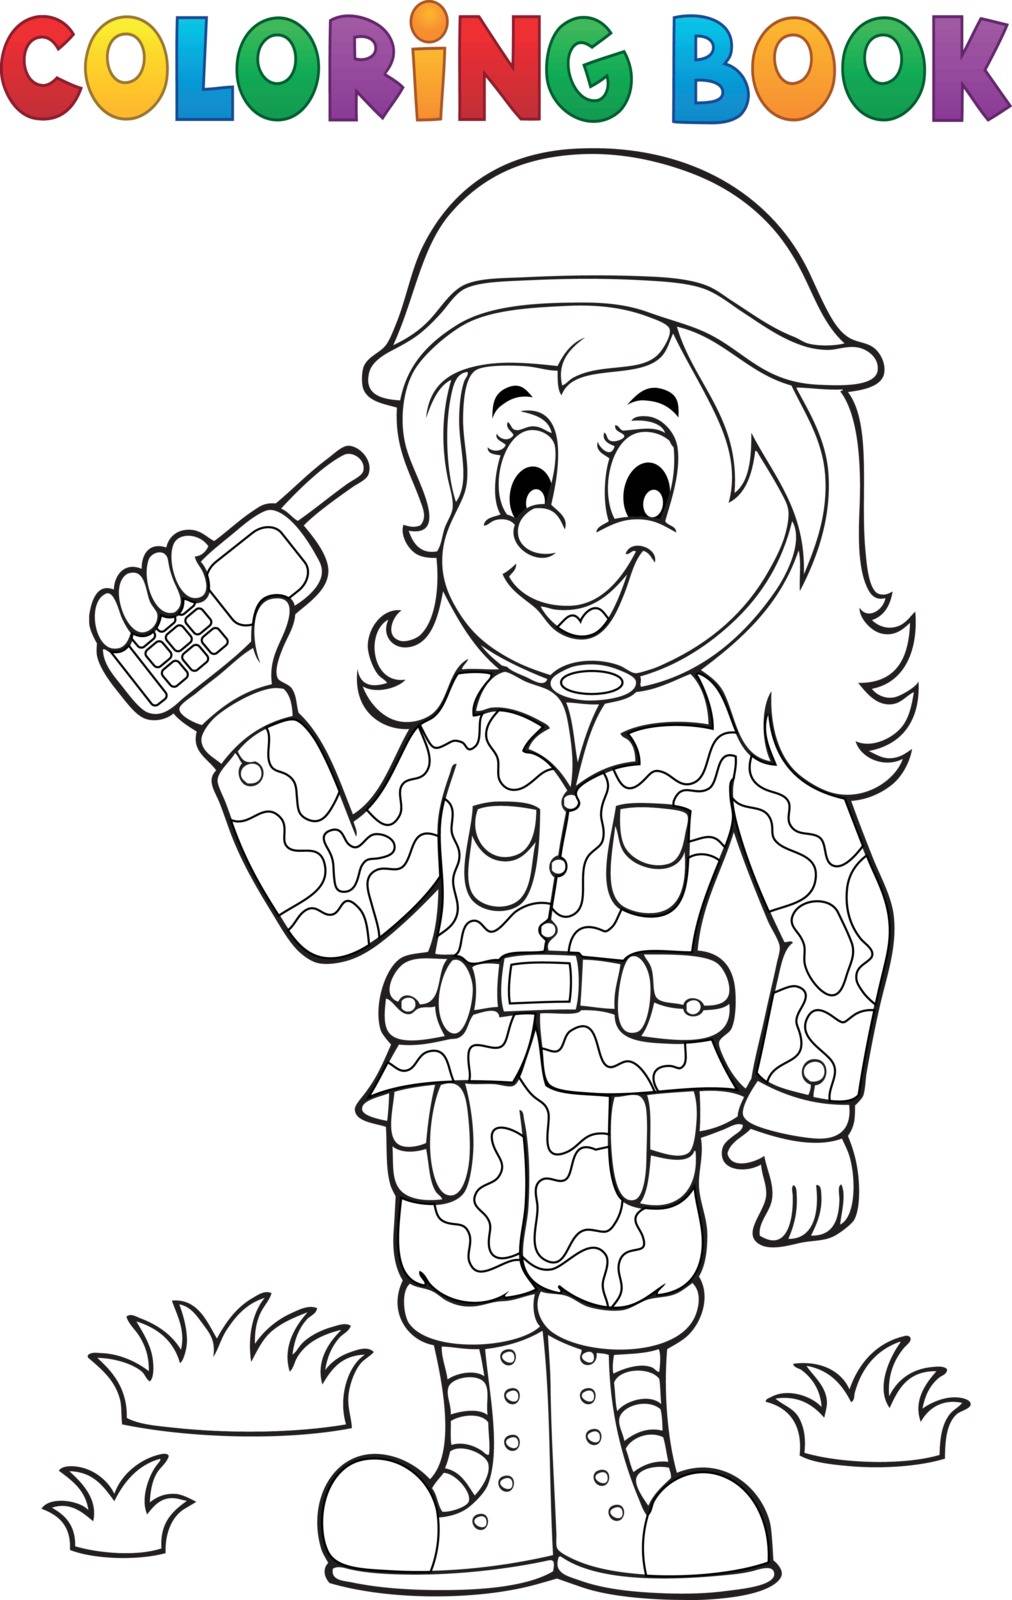 Coloring book female soldier theme 1 by clairev